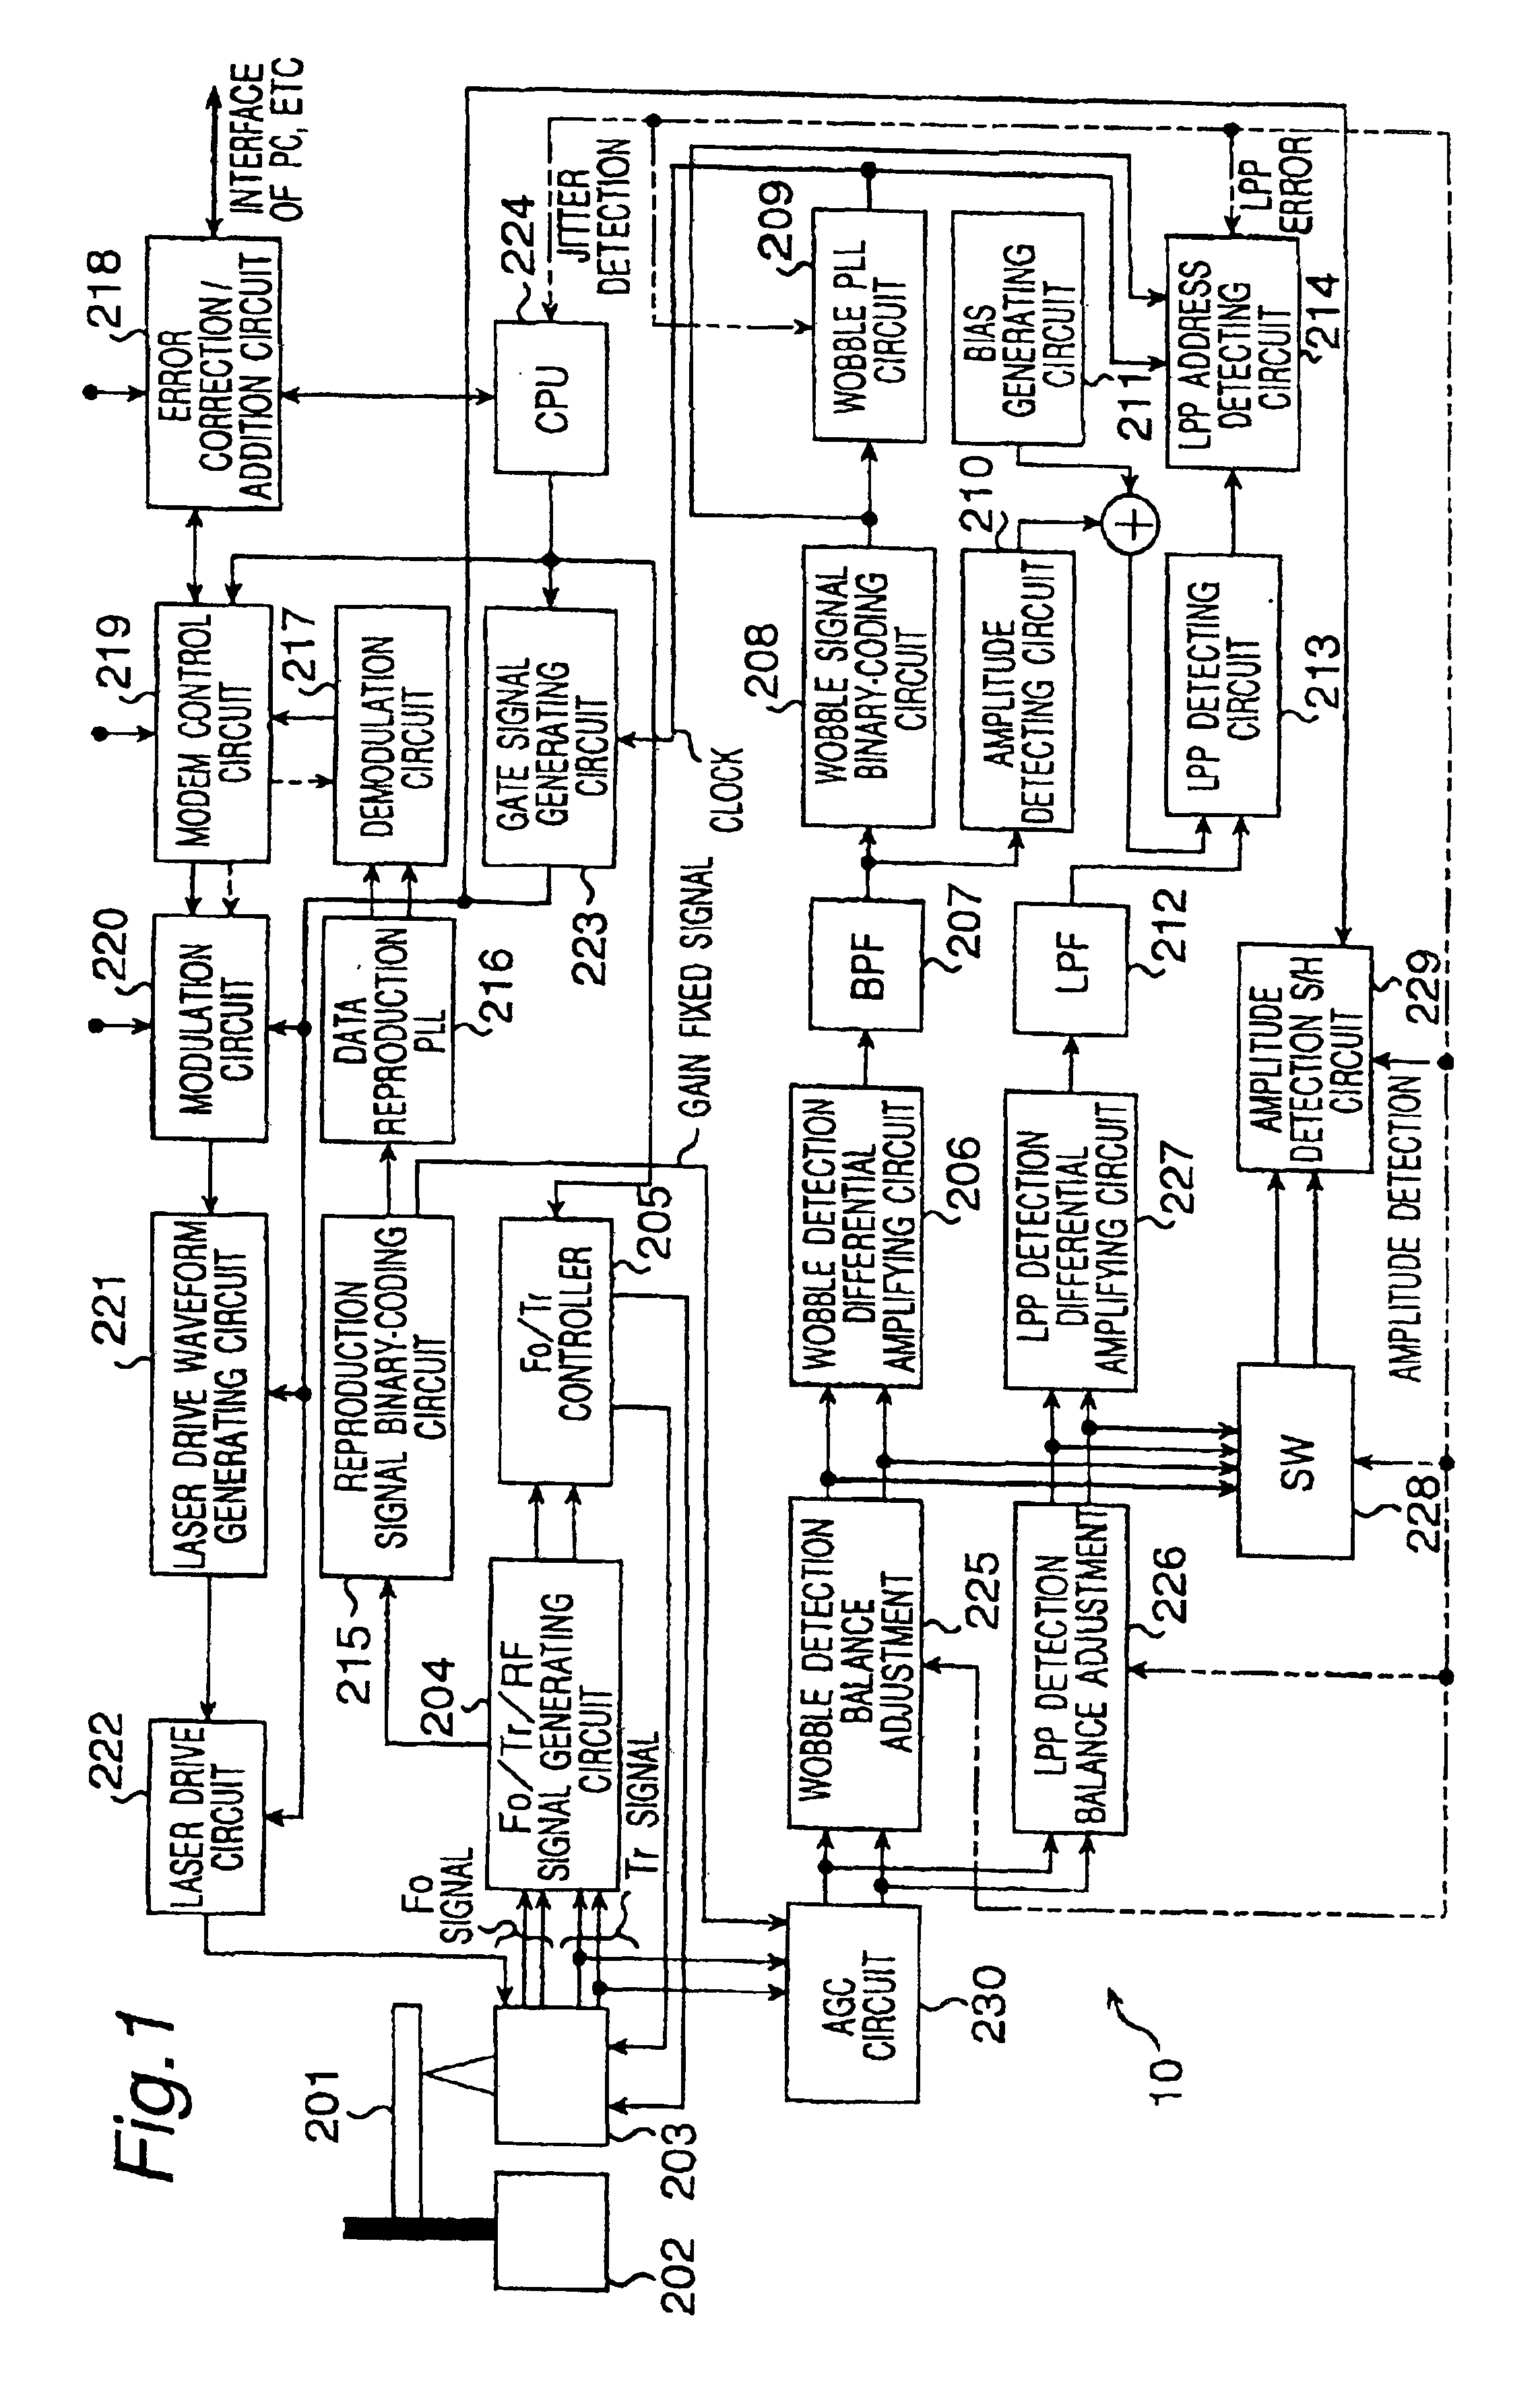 Optical disc apparatus and method for reading information from an optical disk having tracks and spaces between the tracks on which address information is recorded